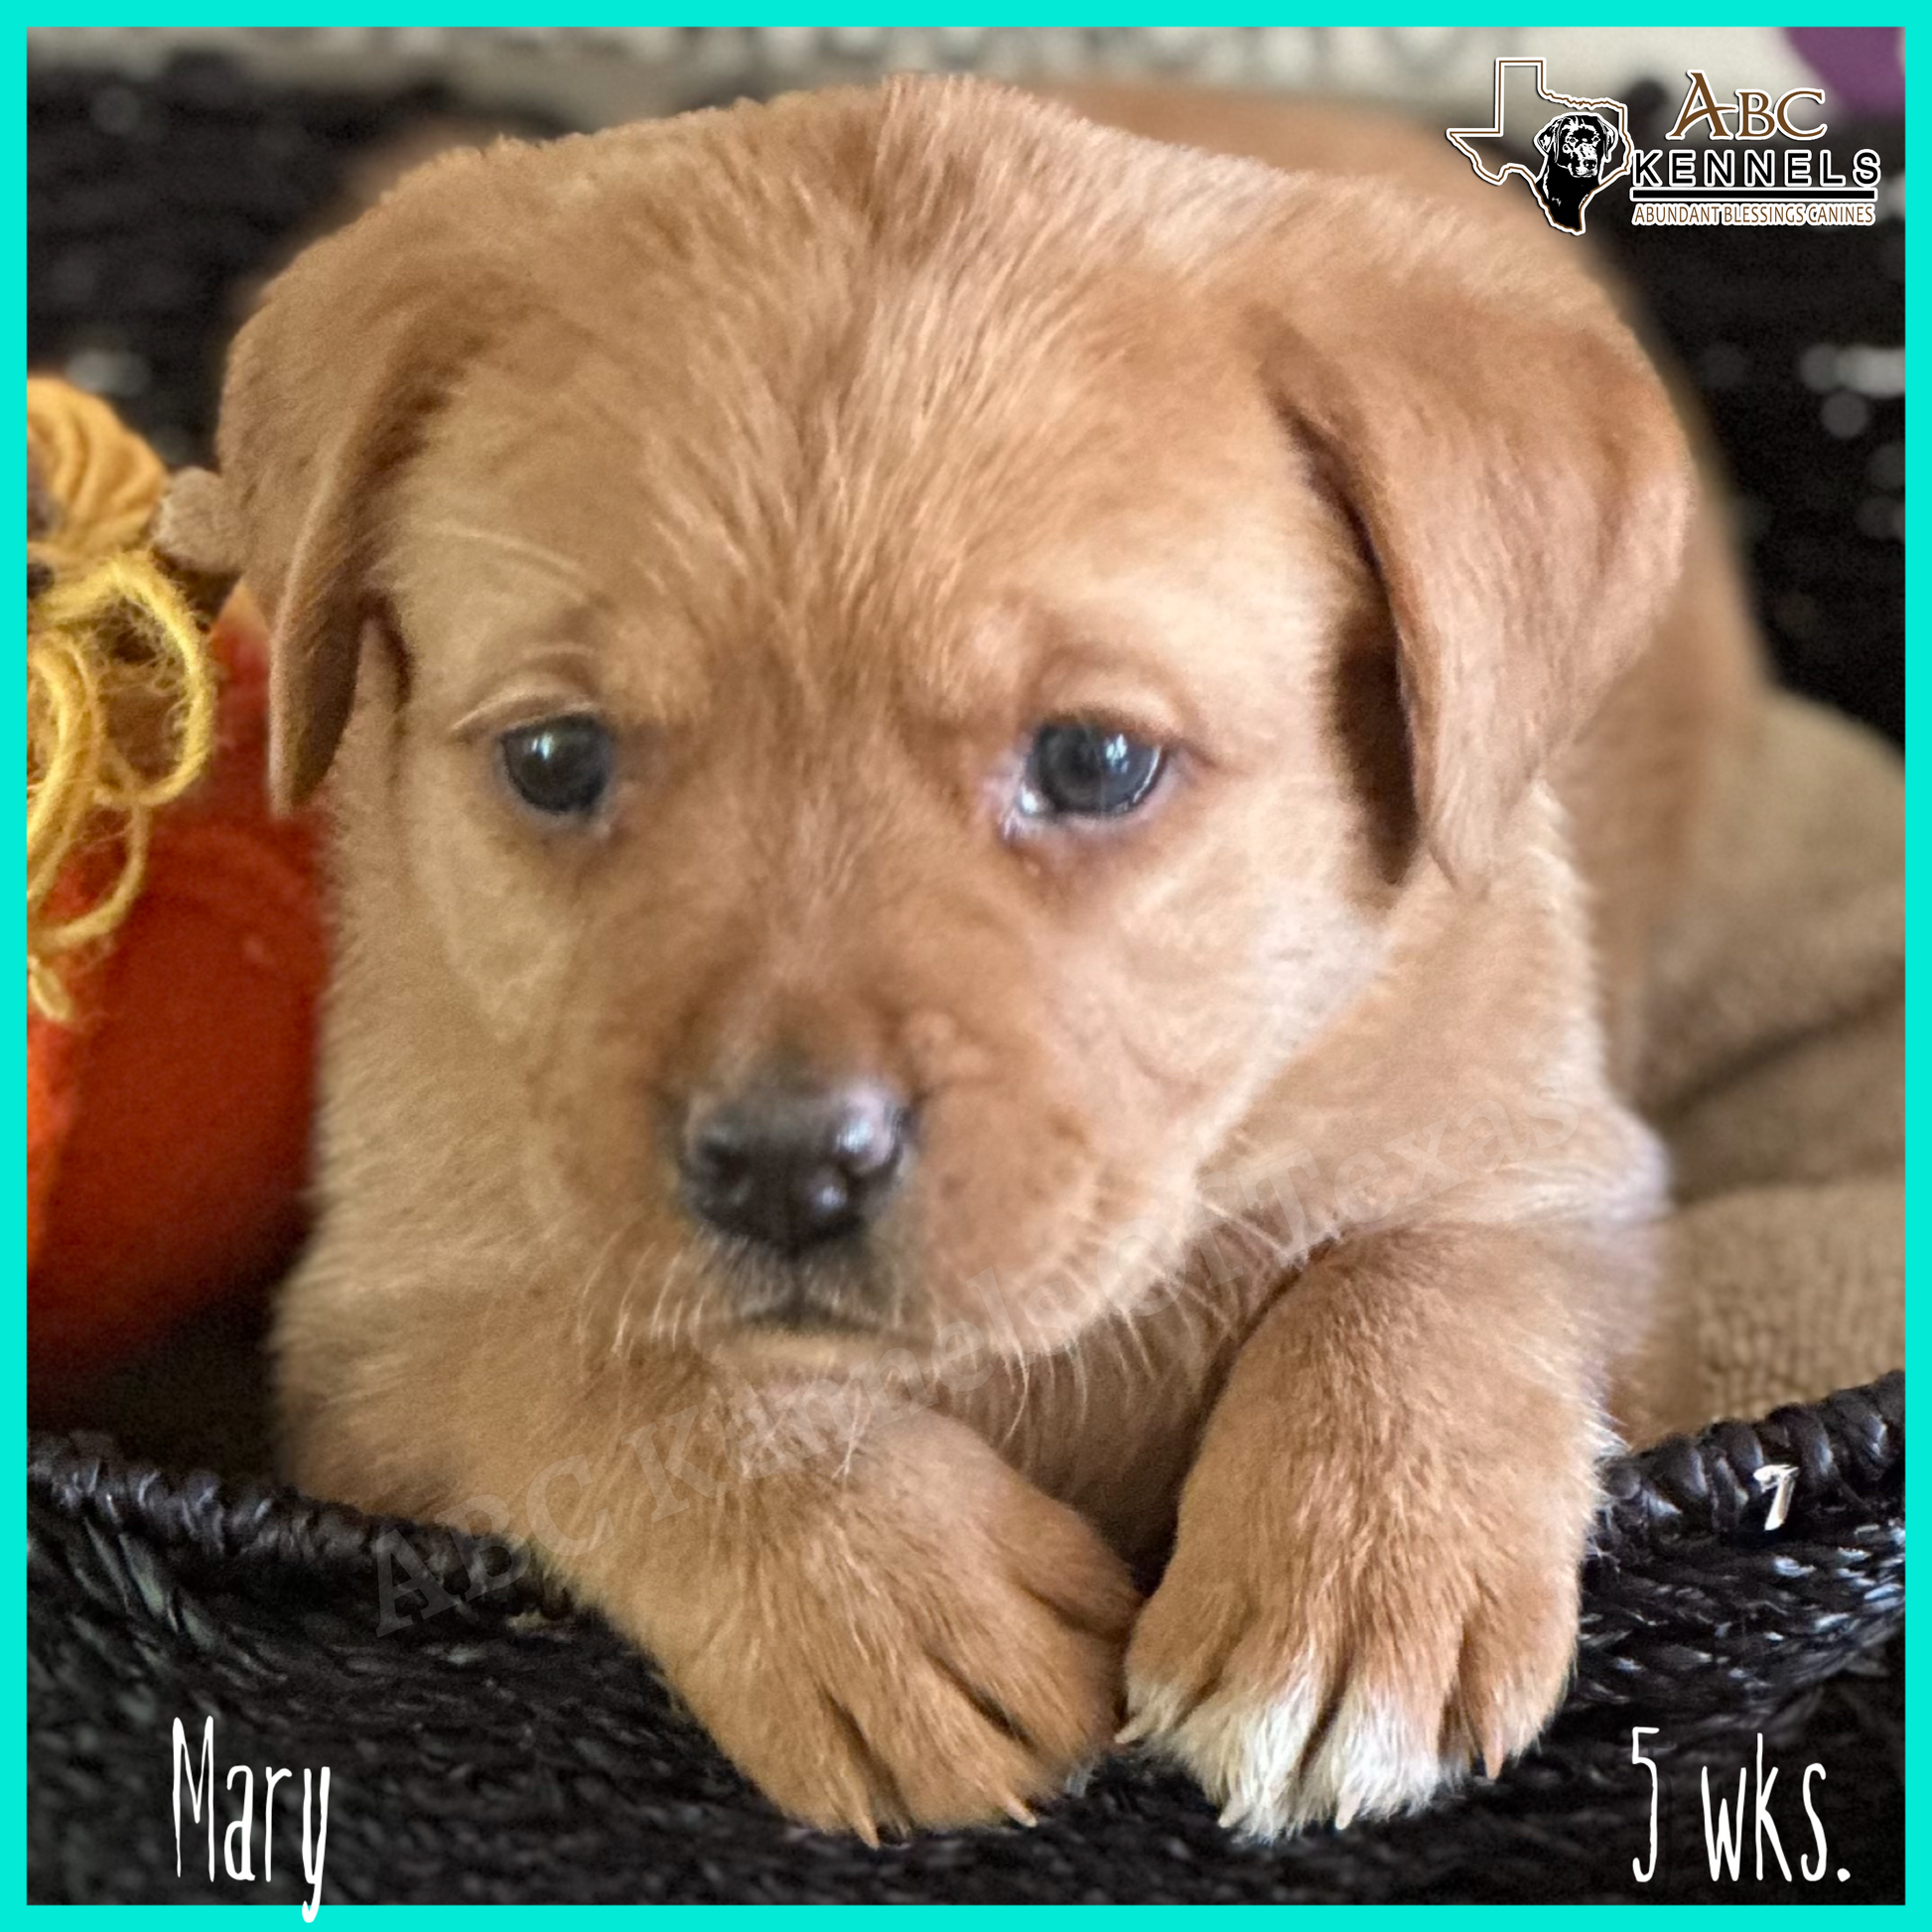 Female Fox Red Labrador Puppy called Mary at 5 weeks old